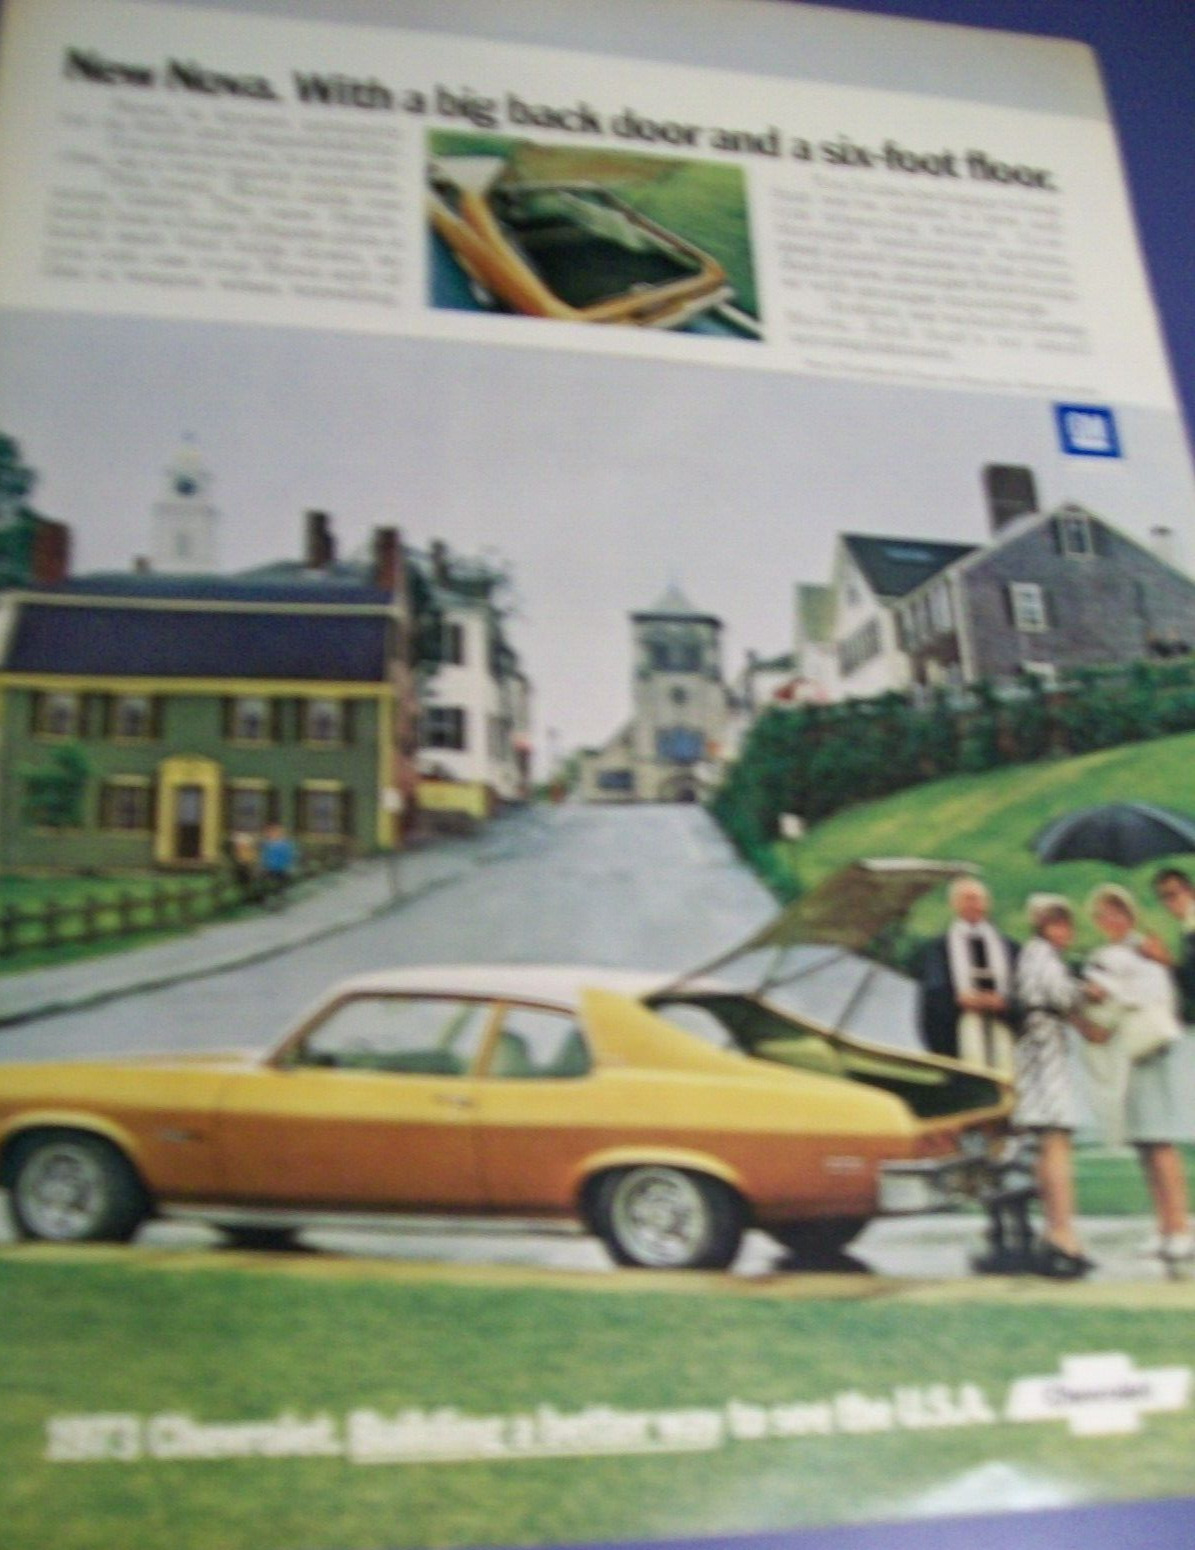 1973 Chevy Nova Hatchback large-mag car ad -at Plymouth Massachusetts